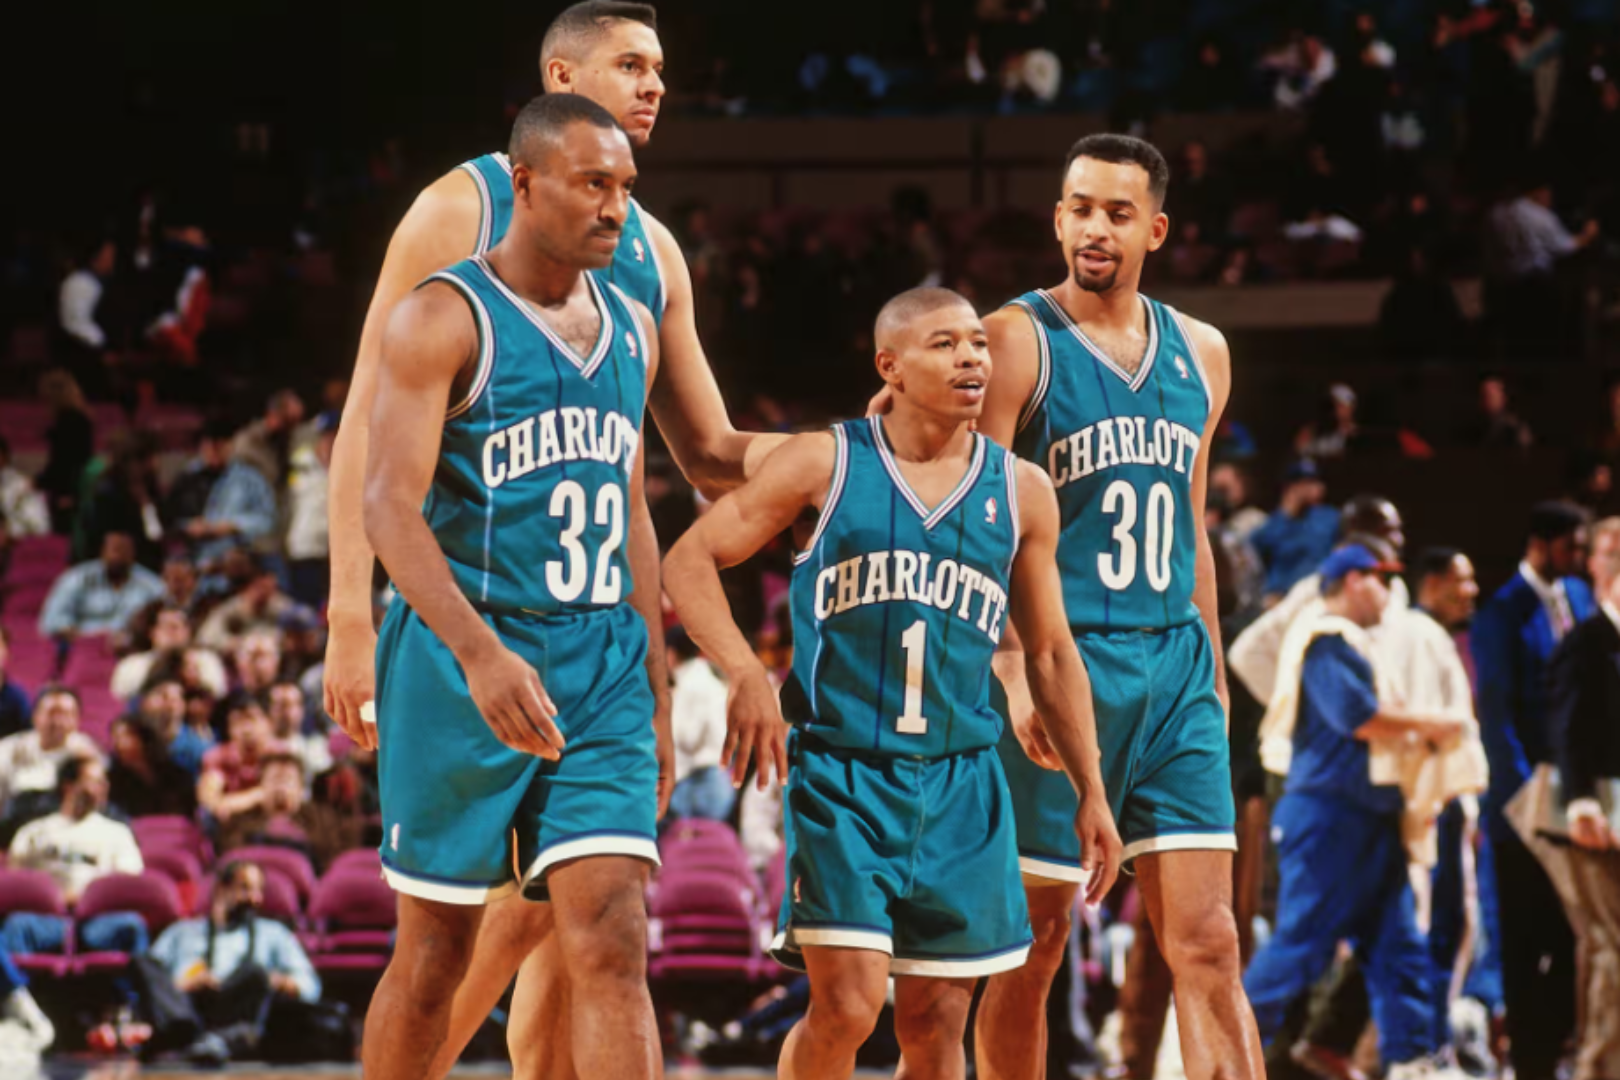 article_img / Can Muggsy Bogues Dunk?